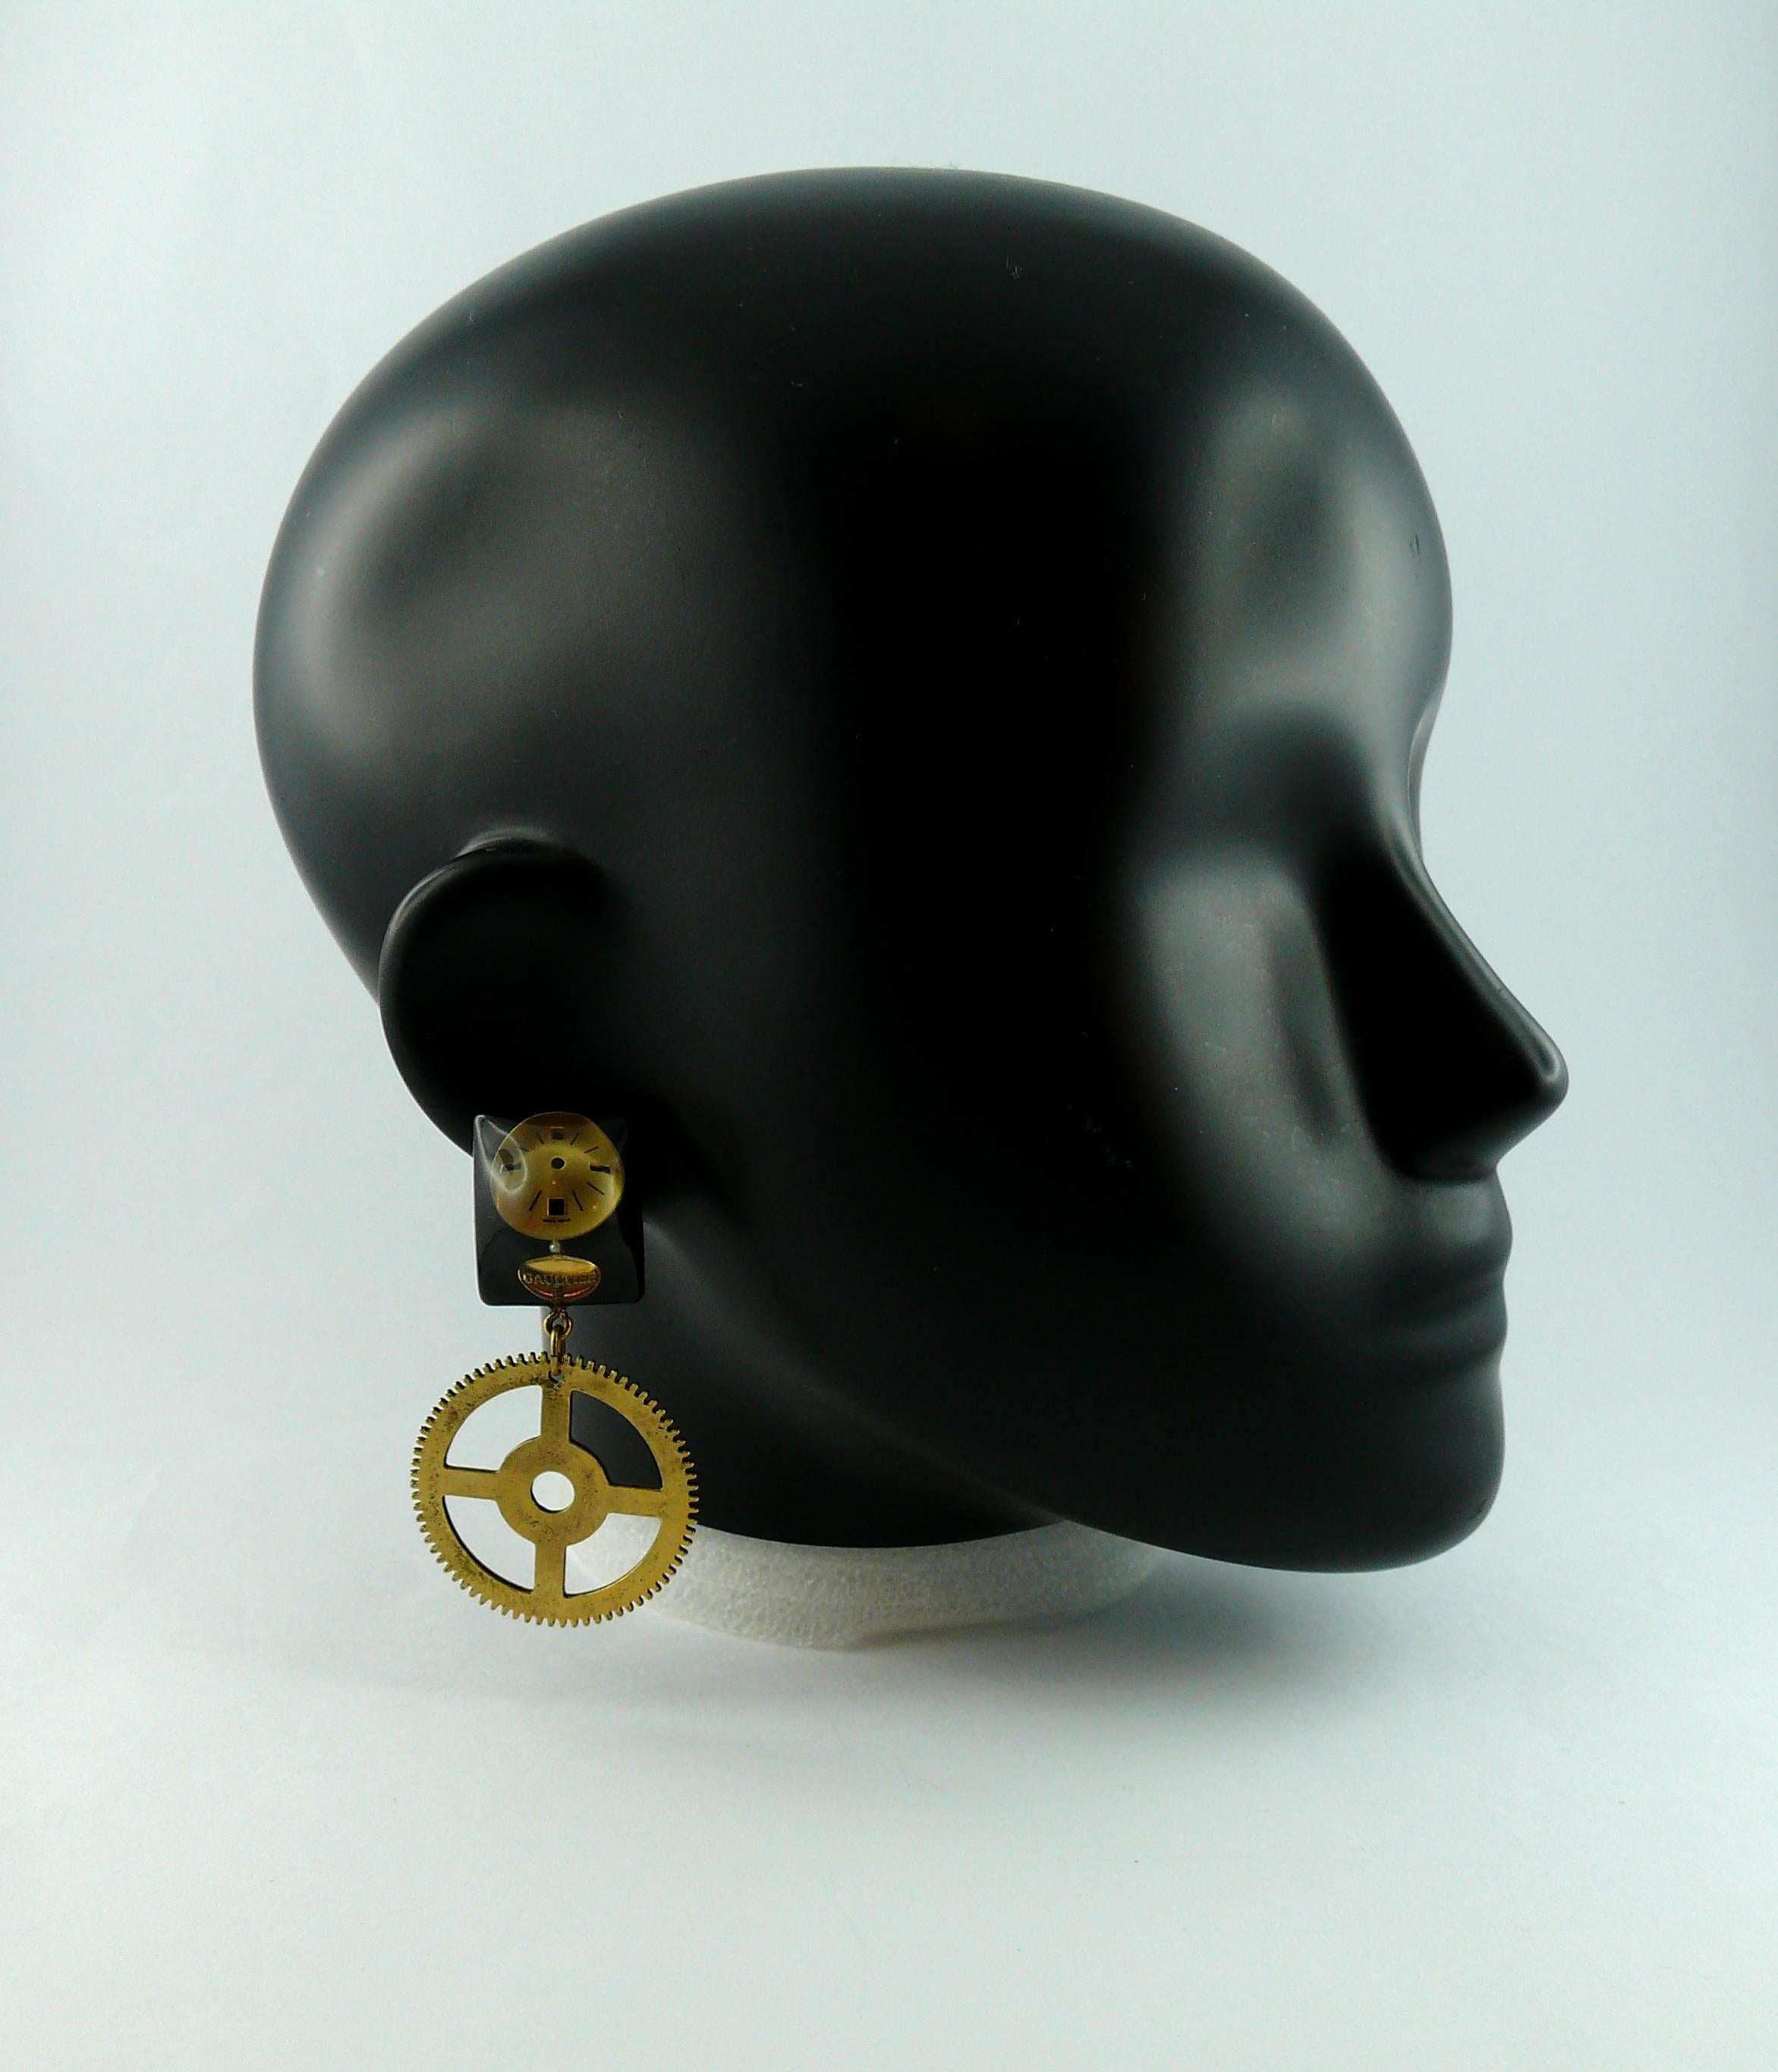 JEAN PAUL GAULTIER vintage rare steampunk dangling earrings (clip-on) featuring a resin watch dial inlaid and a gold tone cog.

Marked GAULTIER.

Comes with original dust bag.

JEWELRY CONDITION CHART
- New or never worn : item is in pristine